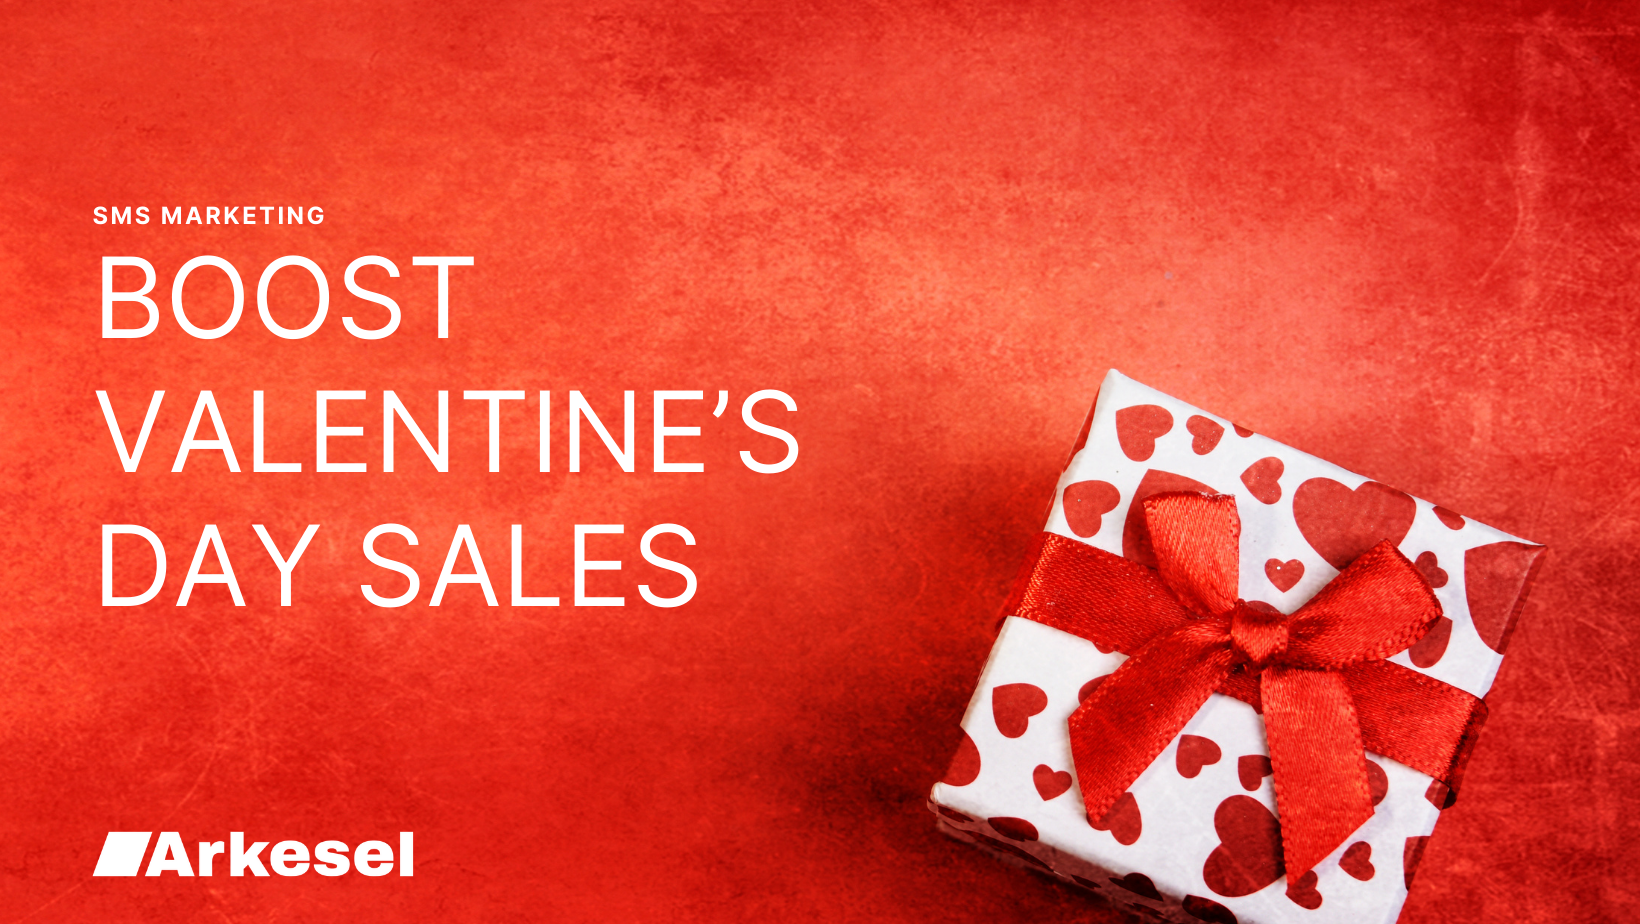 How to Boost Your Valentine’s Day Sales with SMS Marketing